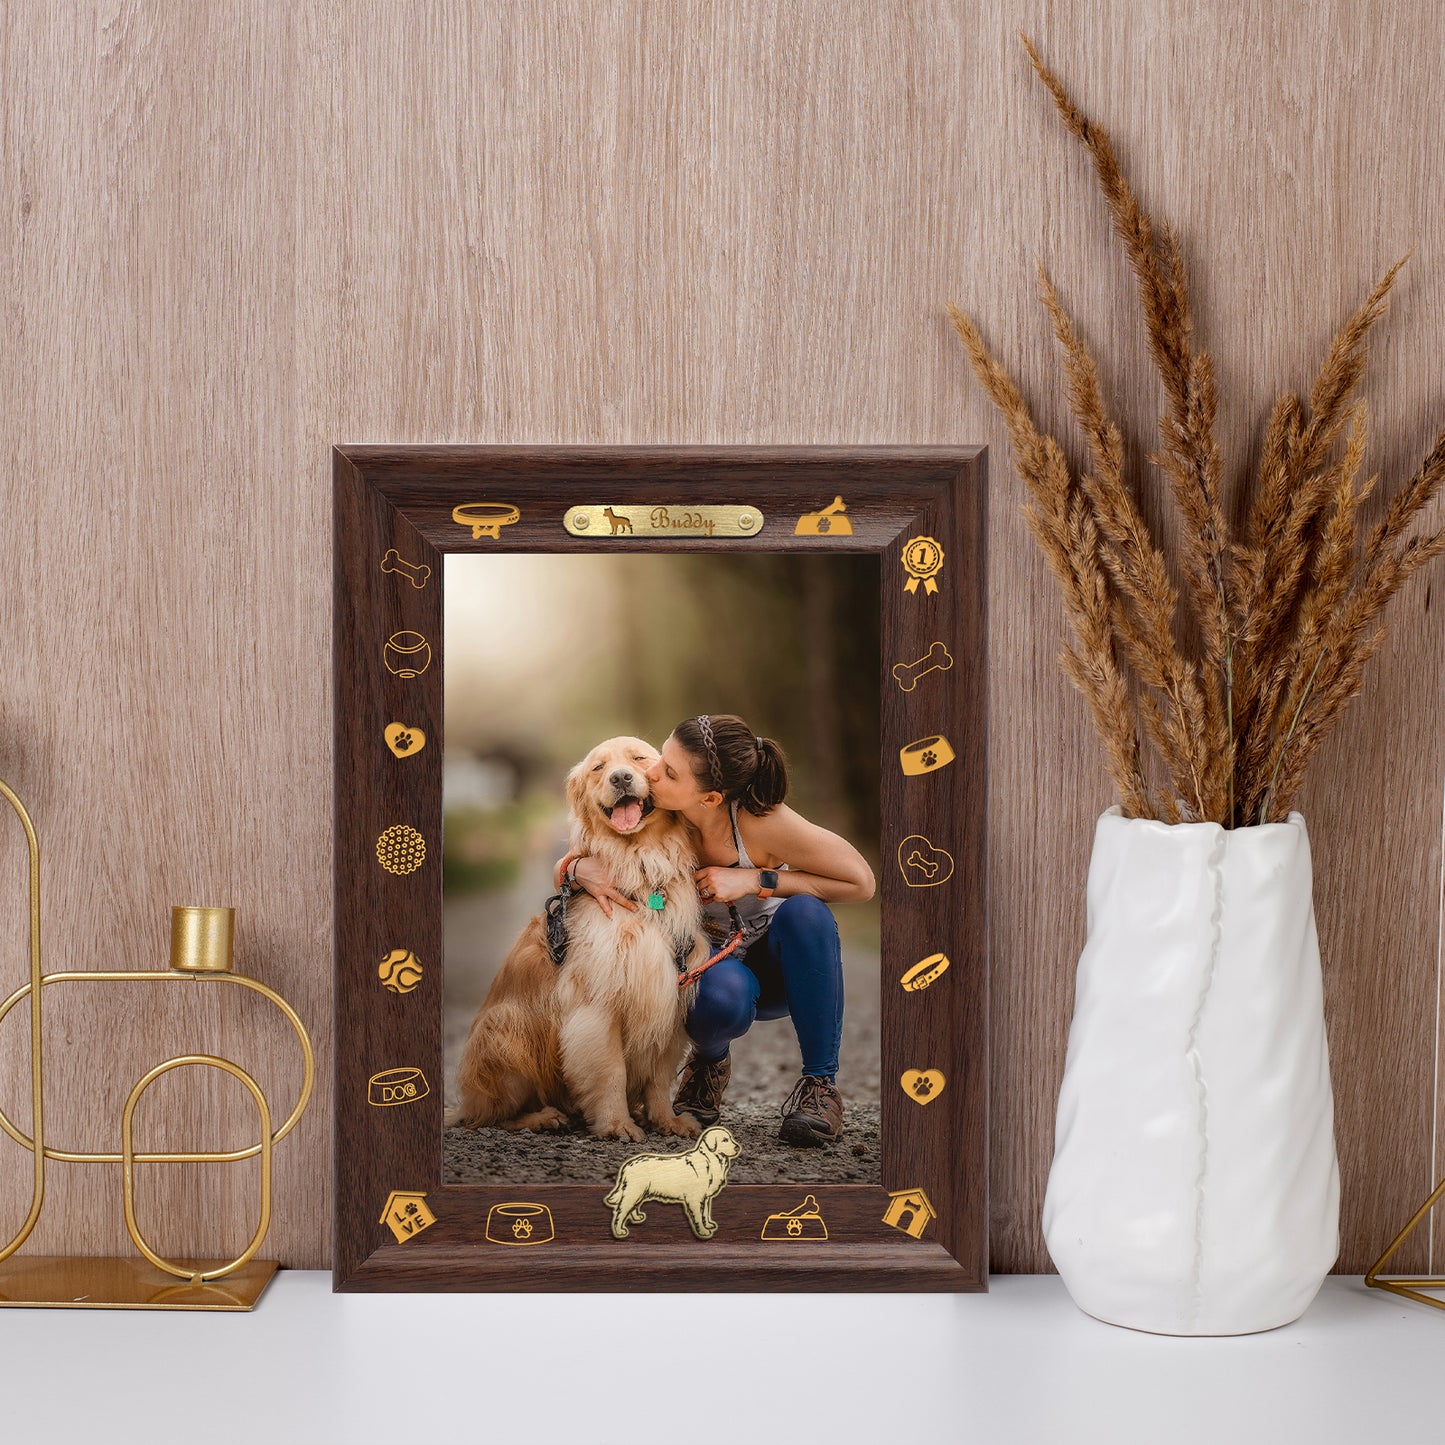 Dotride Custom Picture Frame, Wood Photo Frame with Custom Wooden Carving, Can be engraved with any text you want, suitable for Suitable for Various Themes, Golden Retriever